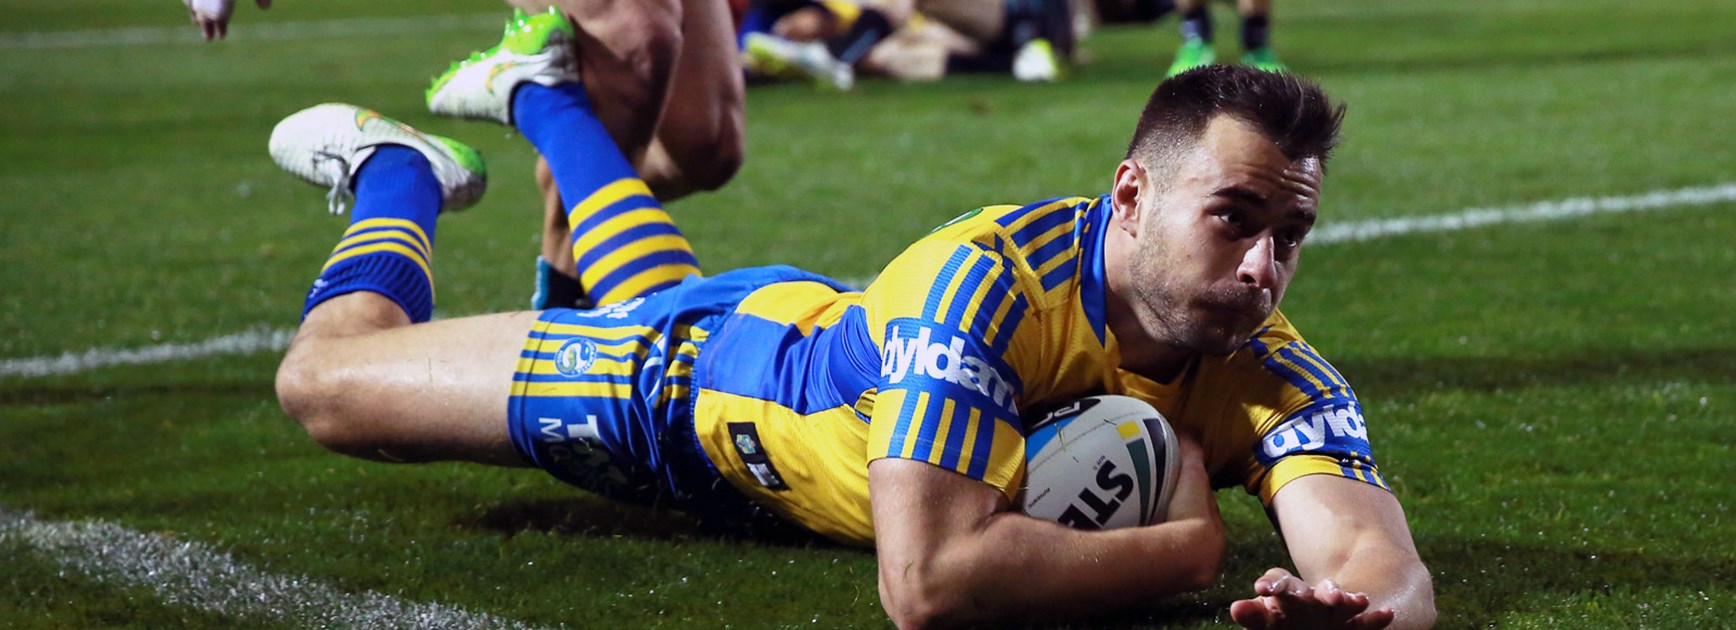 Parramatta winger Ryan Morgan scores for the Eels against the Panthers in Round 12.